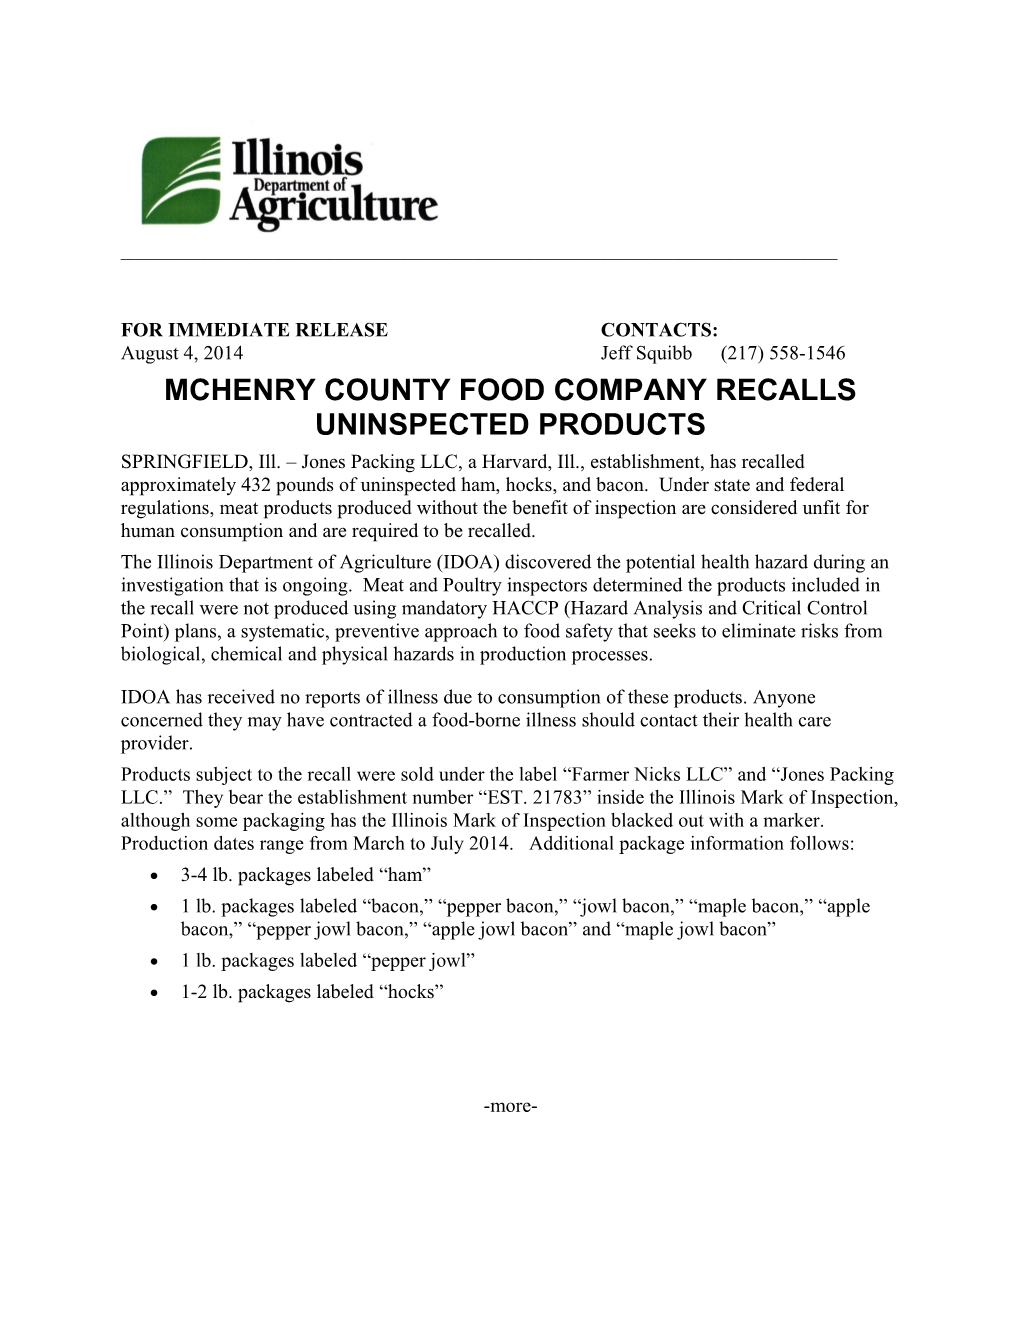 Mchenry County Food Company Recalls Uninspected Products